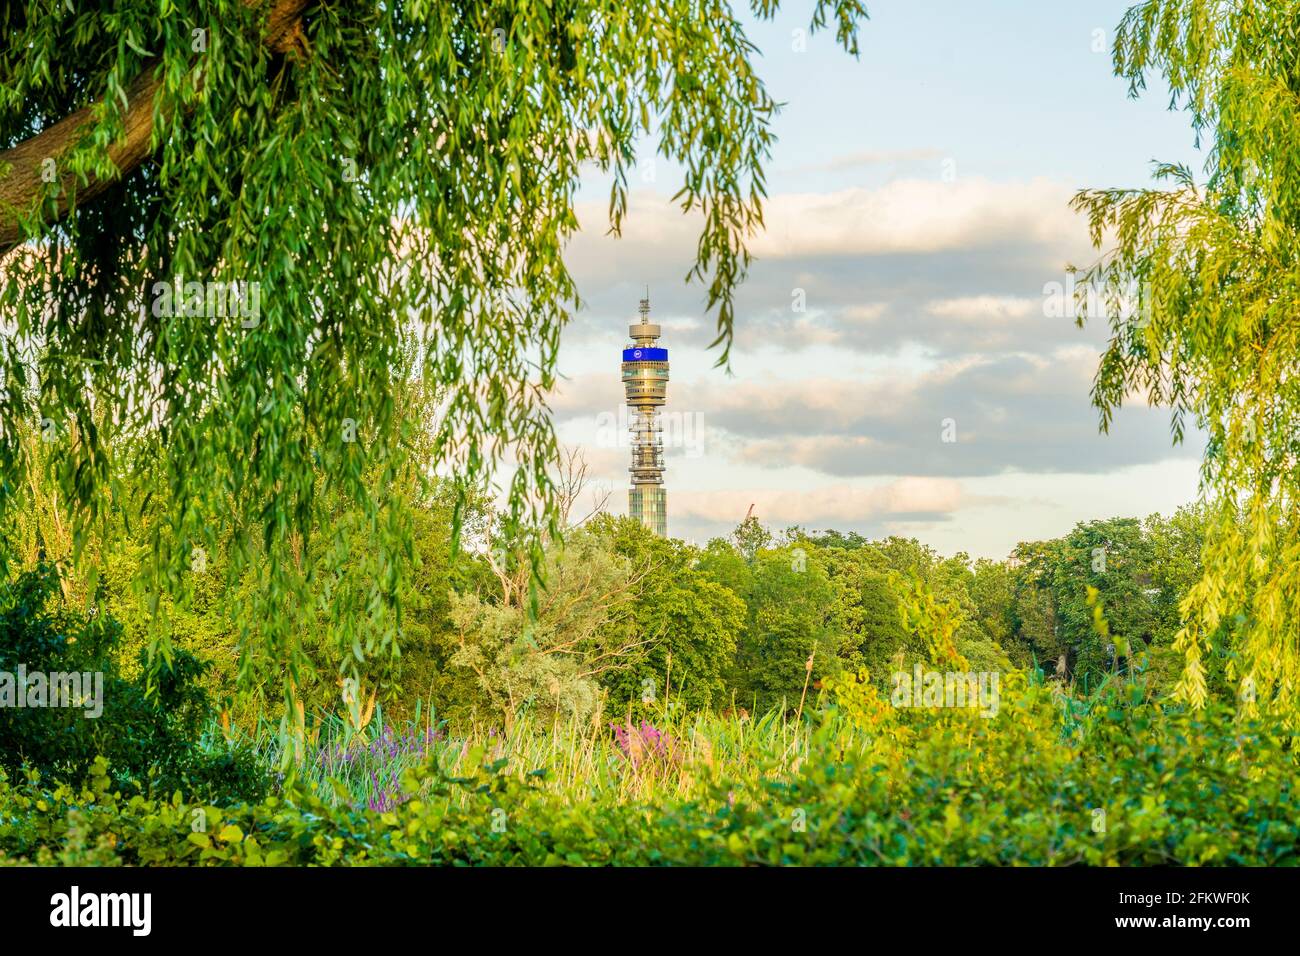 July 2020. London. The Post Office Tower from Regents park in London, England, UK Stock Photo